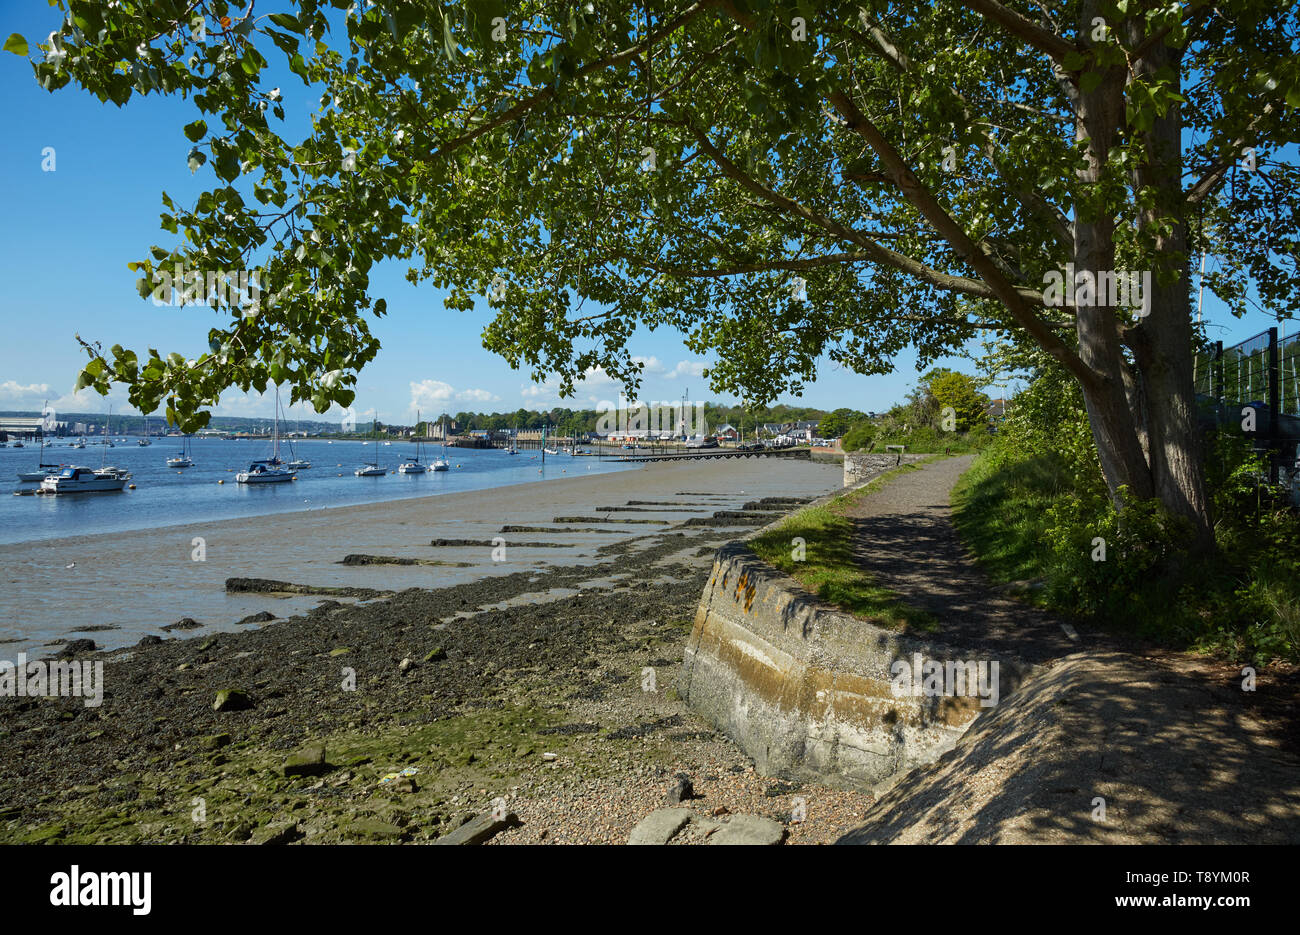 Shoreline on the River Medway at Lower Upnor, Kent,UK.The Saxon Shore Way footpath can be seen on the right hand side of the photograph. Stock Photo